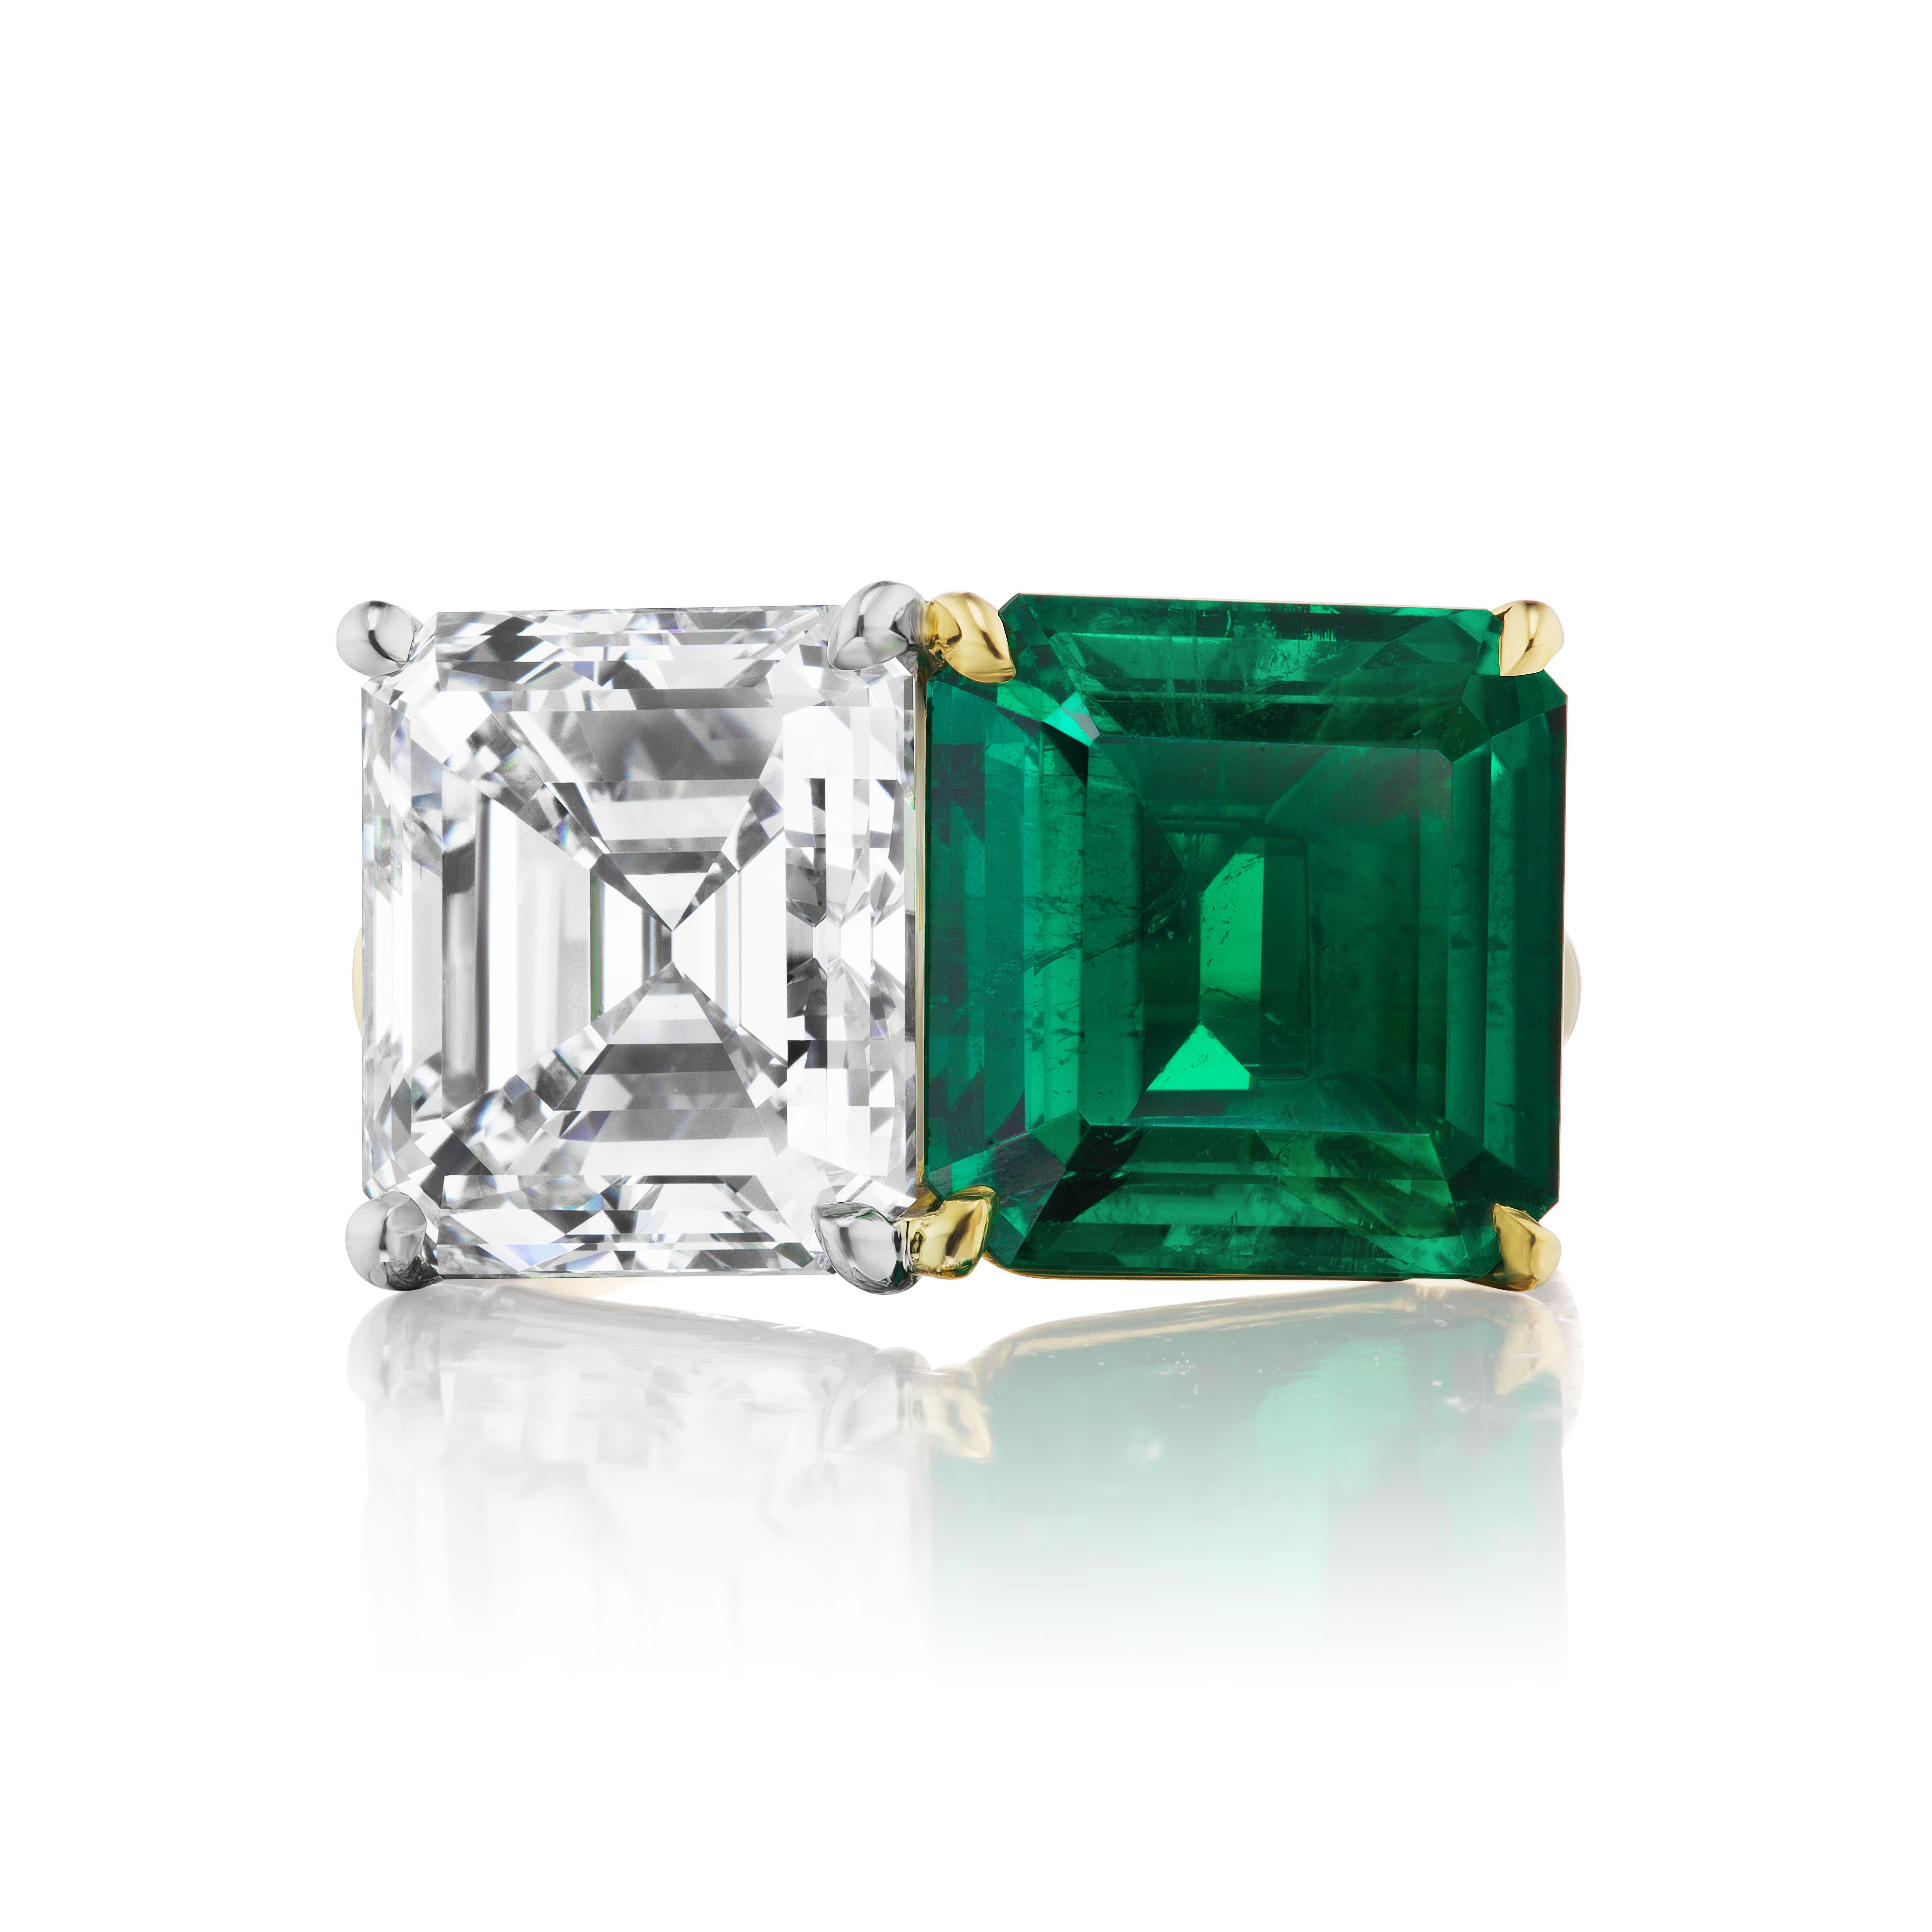 This chic BULGARI cocktail ring features an exceptional 5.79 carat AGL certified Colombian emerald and a GIA certified 7.25 carat square emerlad-cut diamond of E color and VS1 clarity mounted in an 18K gold and platinum twin-stone ring. It is a